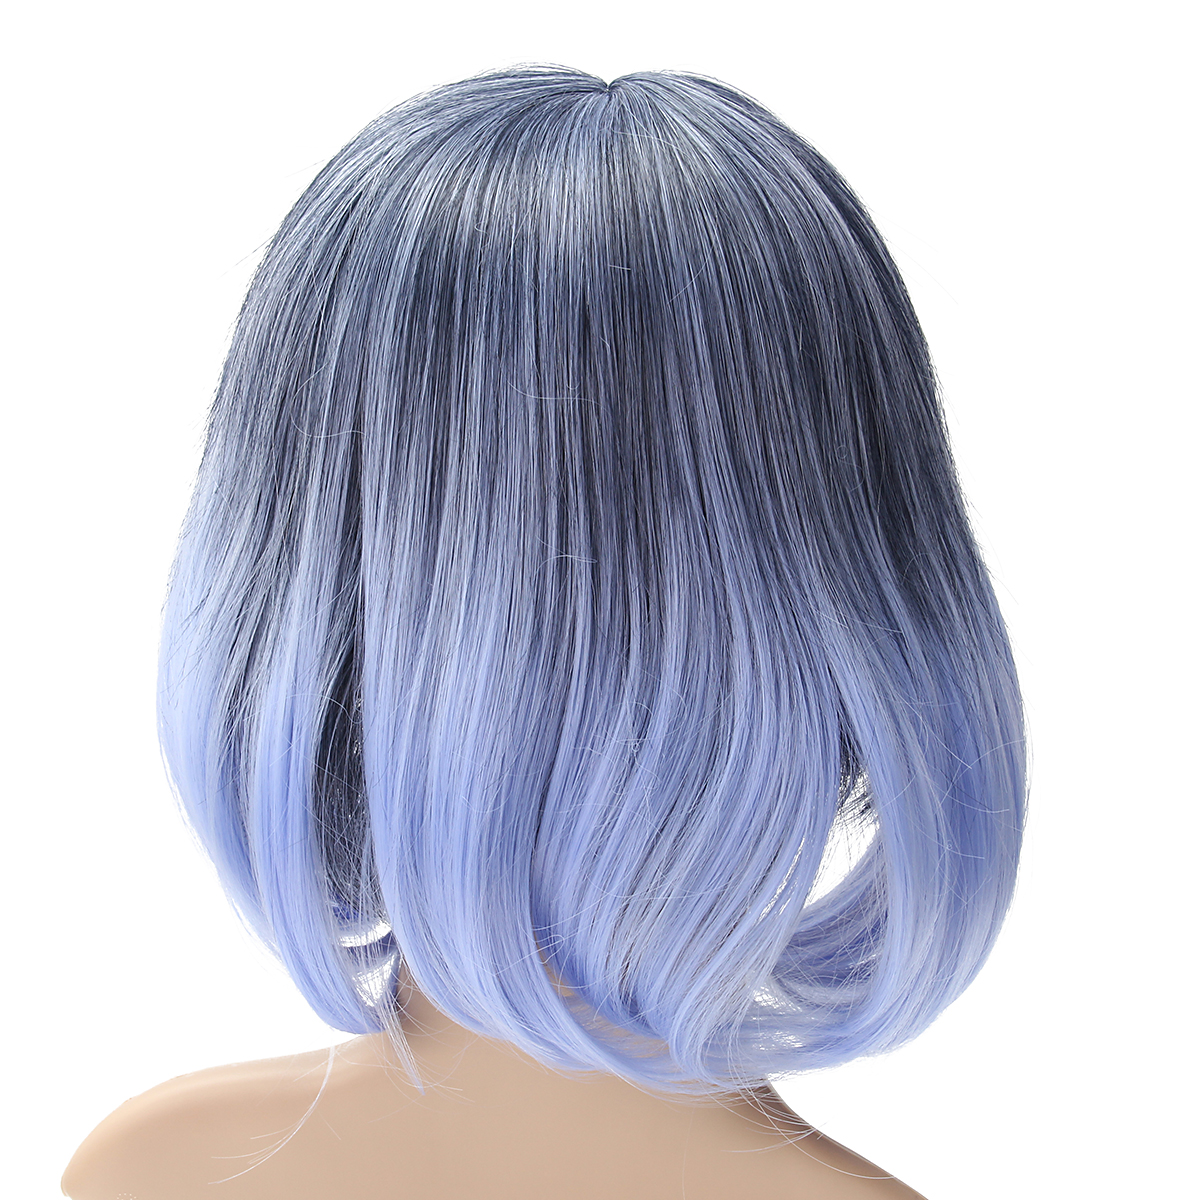 35-40cm-Blue-Gradient-Cosplay-Wig-Woman-Short-Curly-Hair-Anime-Natural-Role-Play-Capless-1133241-4